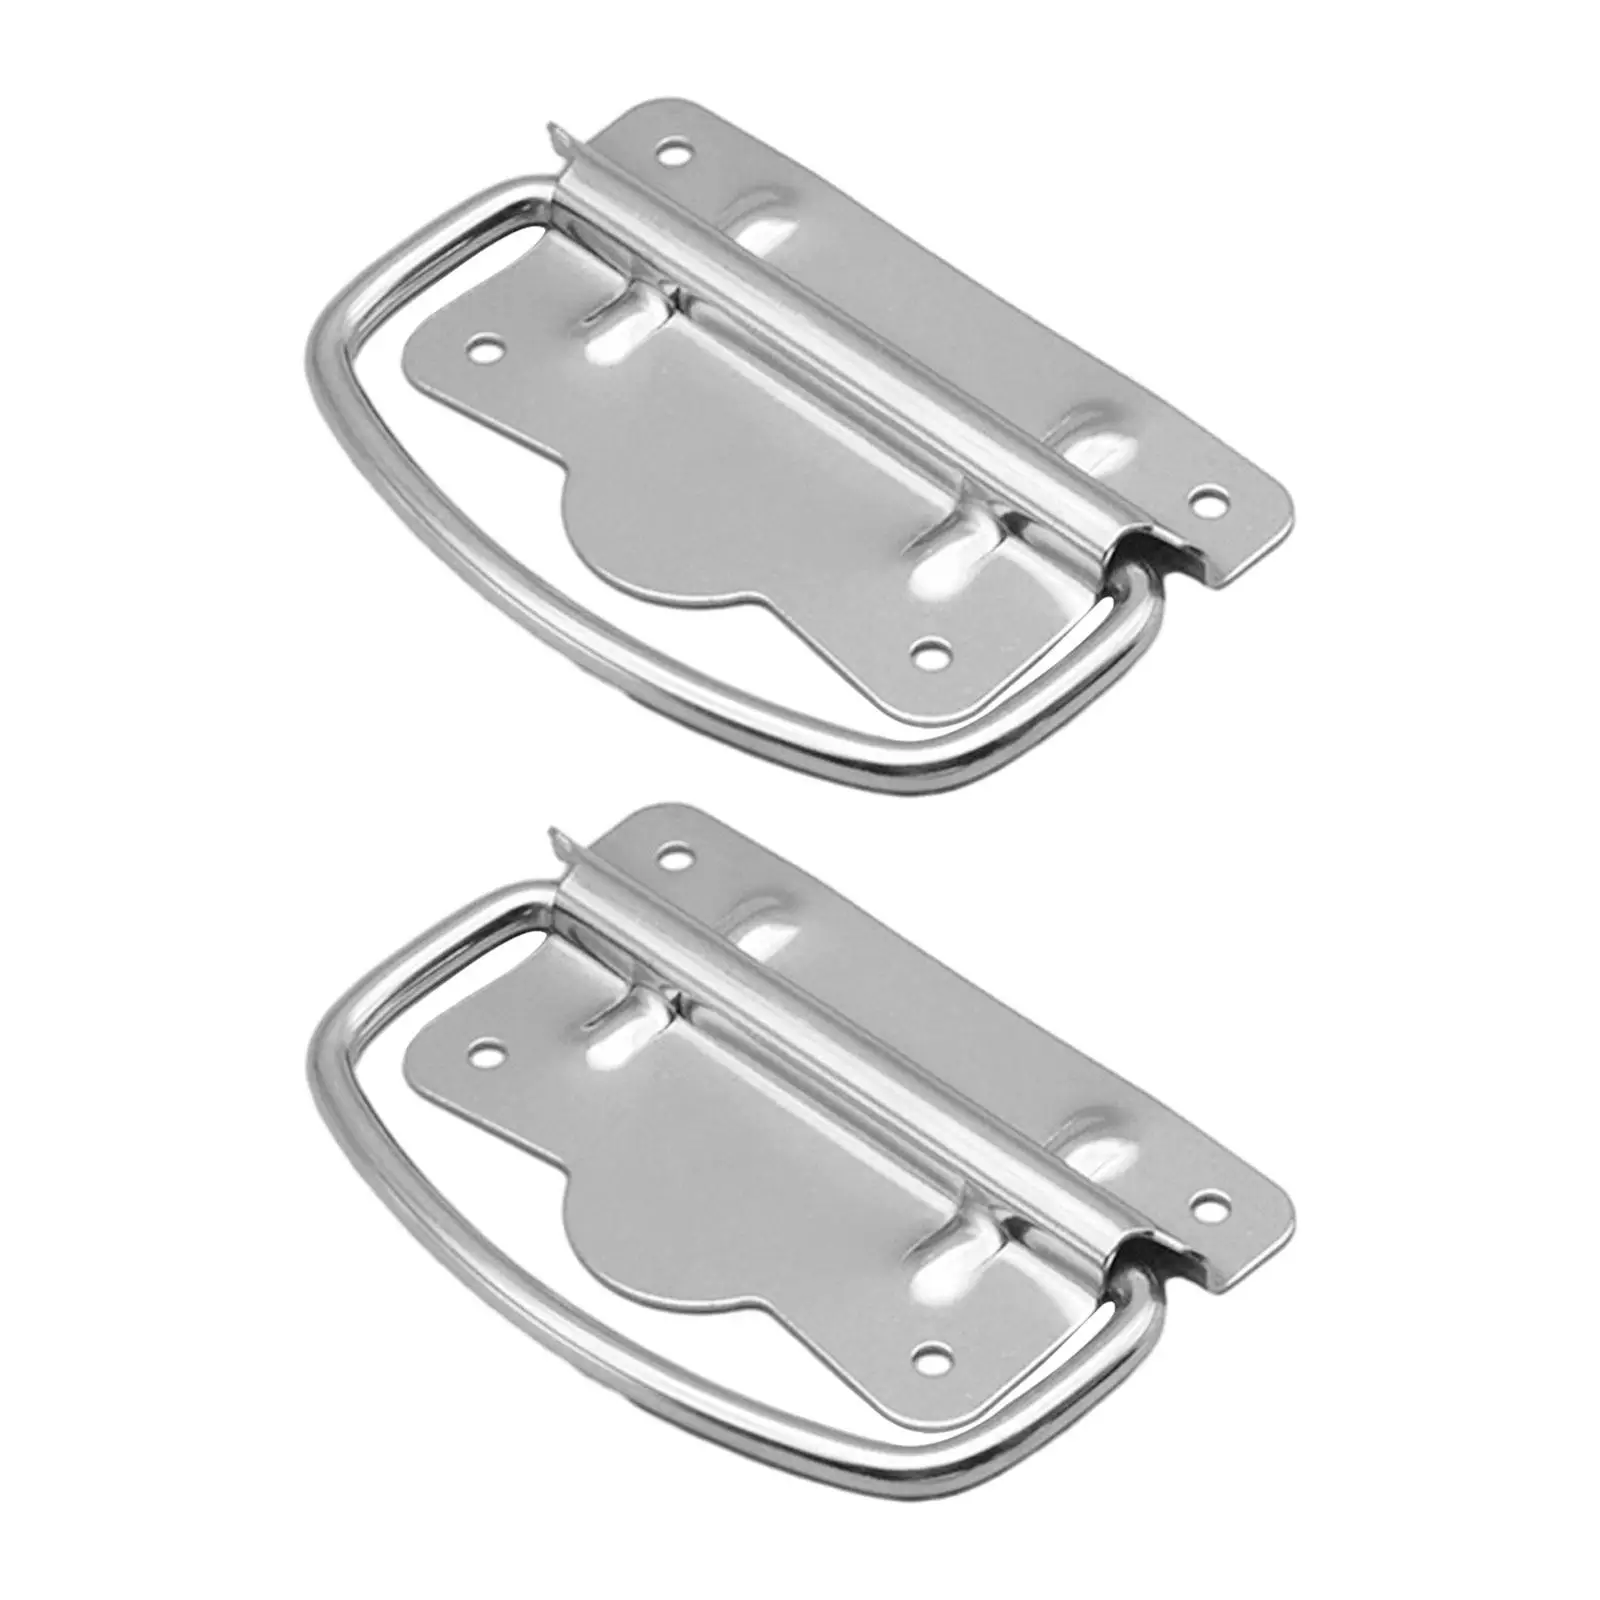 2x Stainless Steel Rings Folding Pull Handle Stainless Steel Foldable Boat Latch for Dresser Door Chest Cabinet Wardrobe Drawers